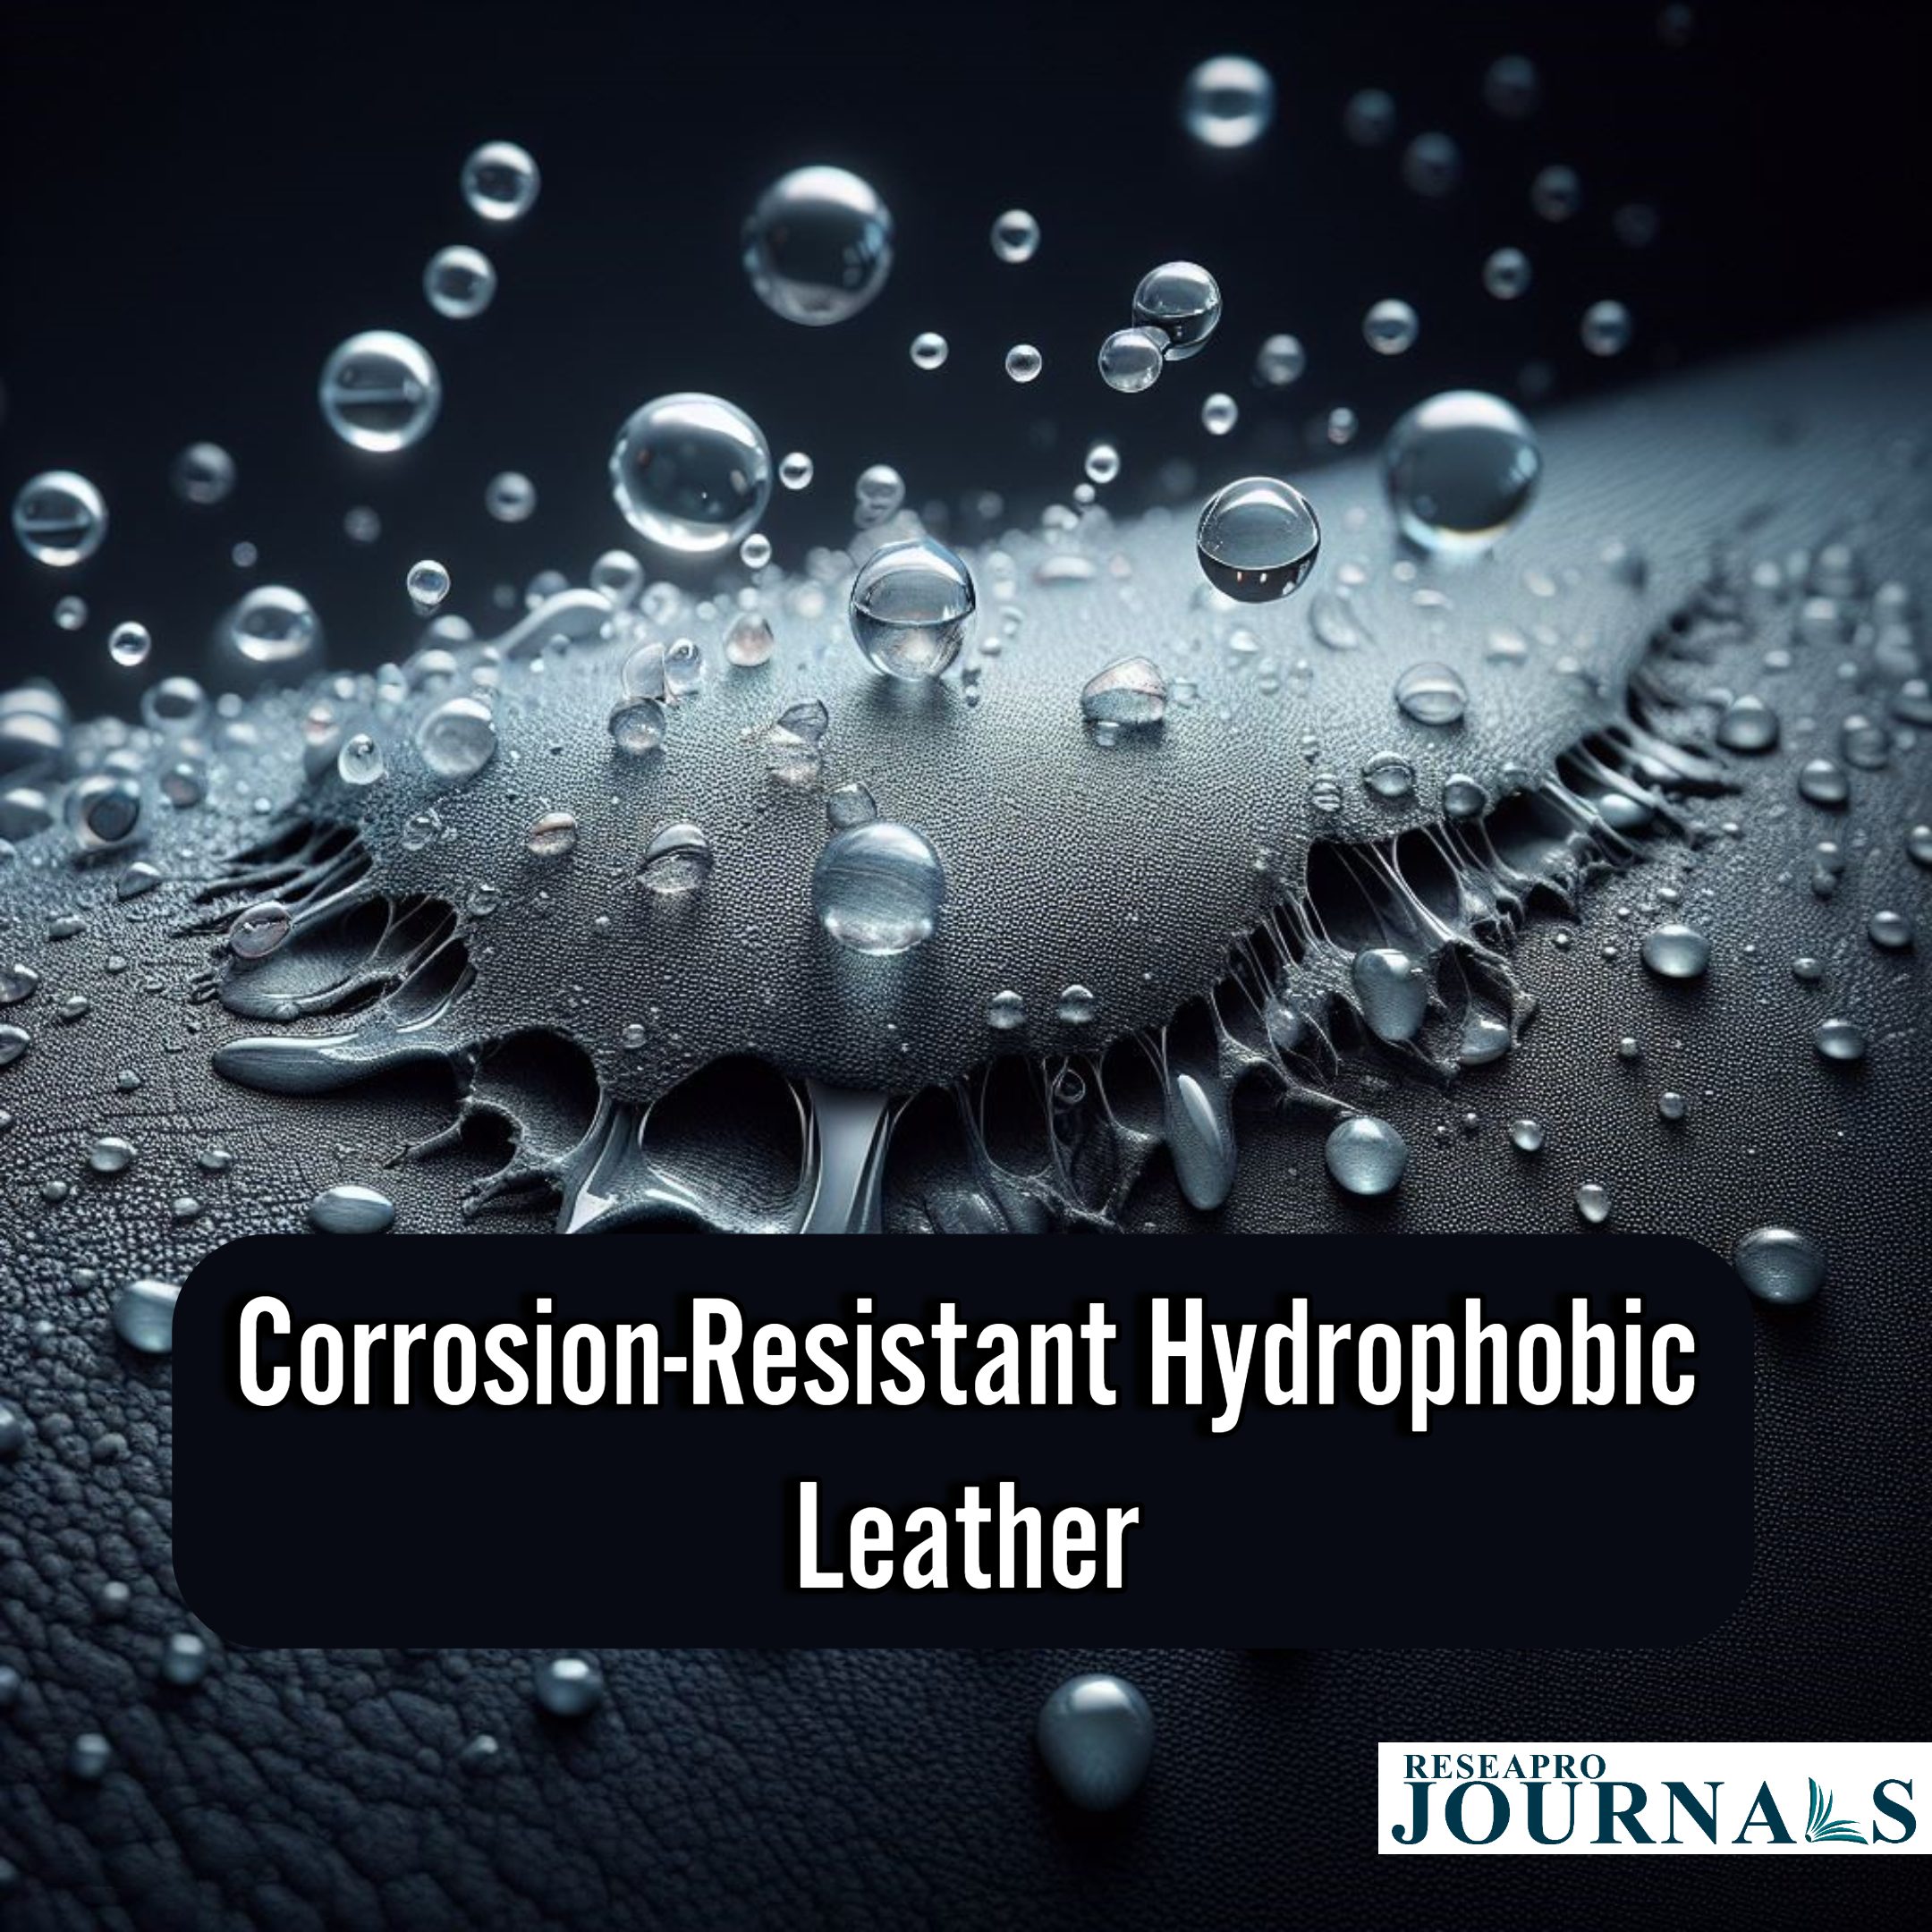 Corrosion-Resistant Hydrophobic Leather